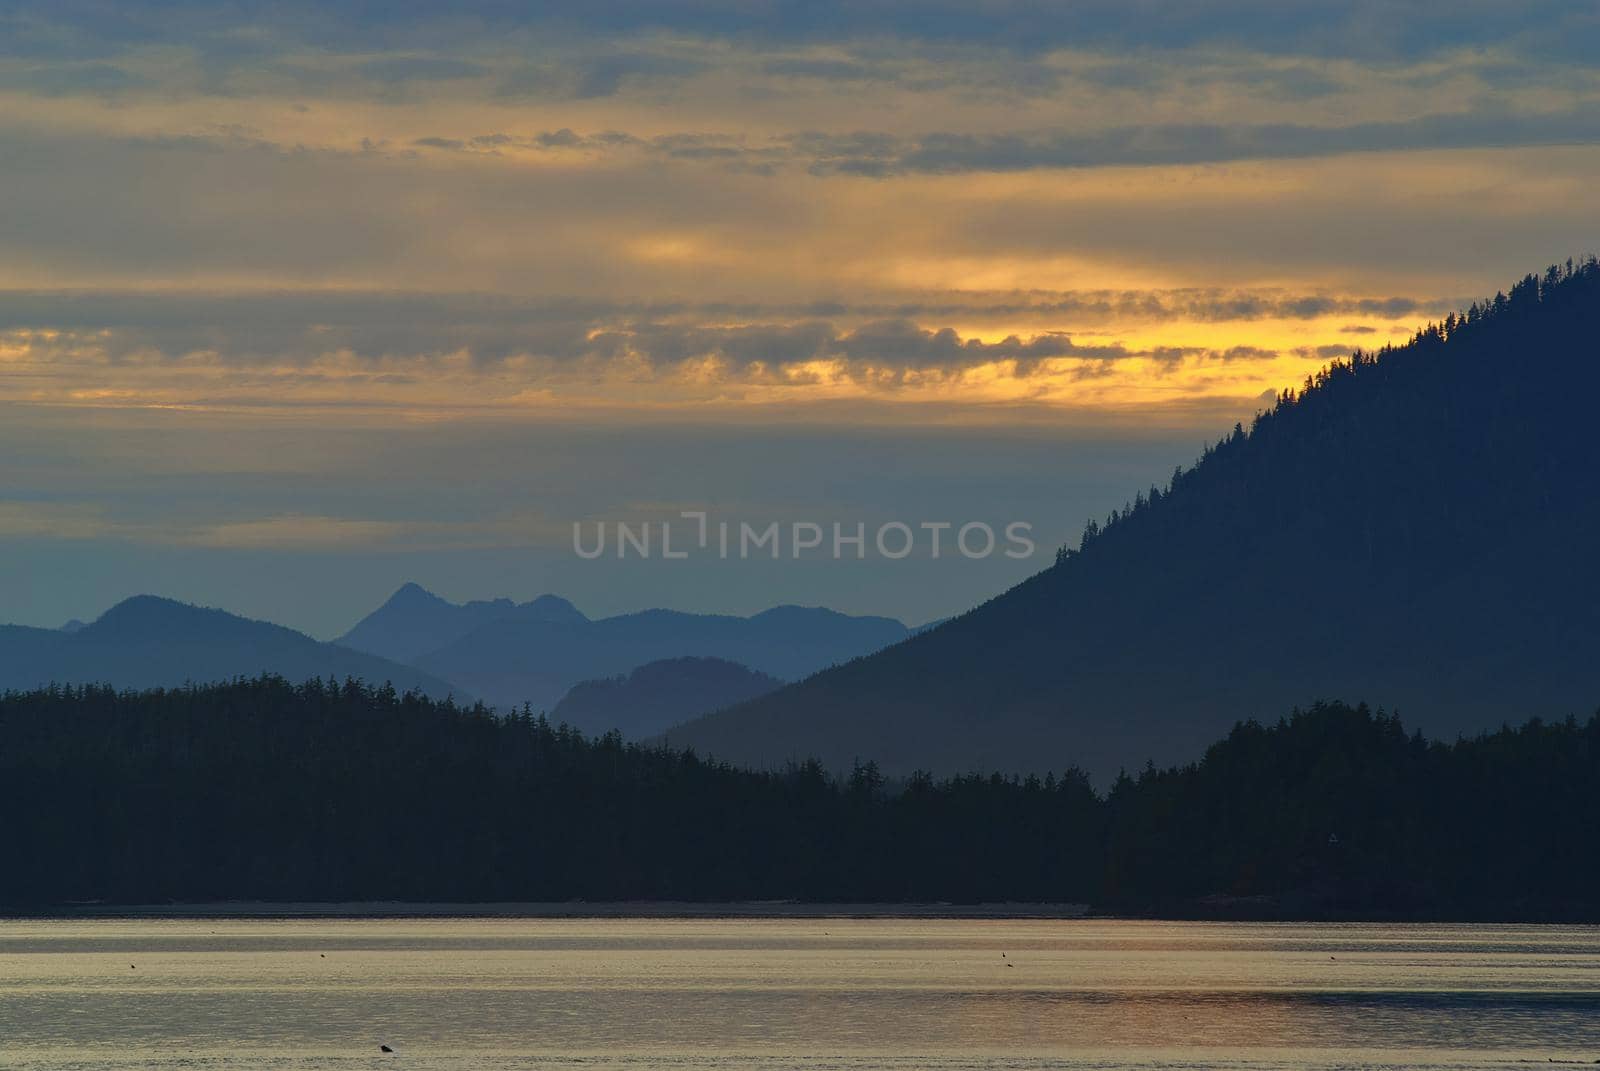 Sunset View of Mountains from Tofino on Vancouver Island in Canada by markvandam